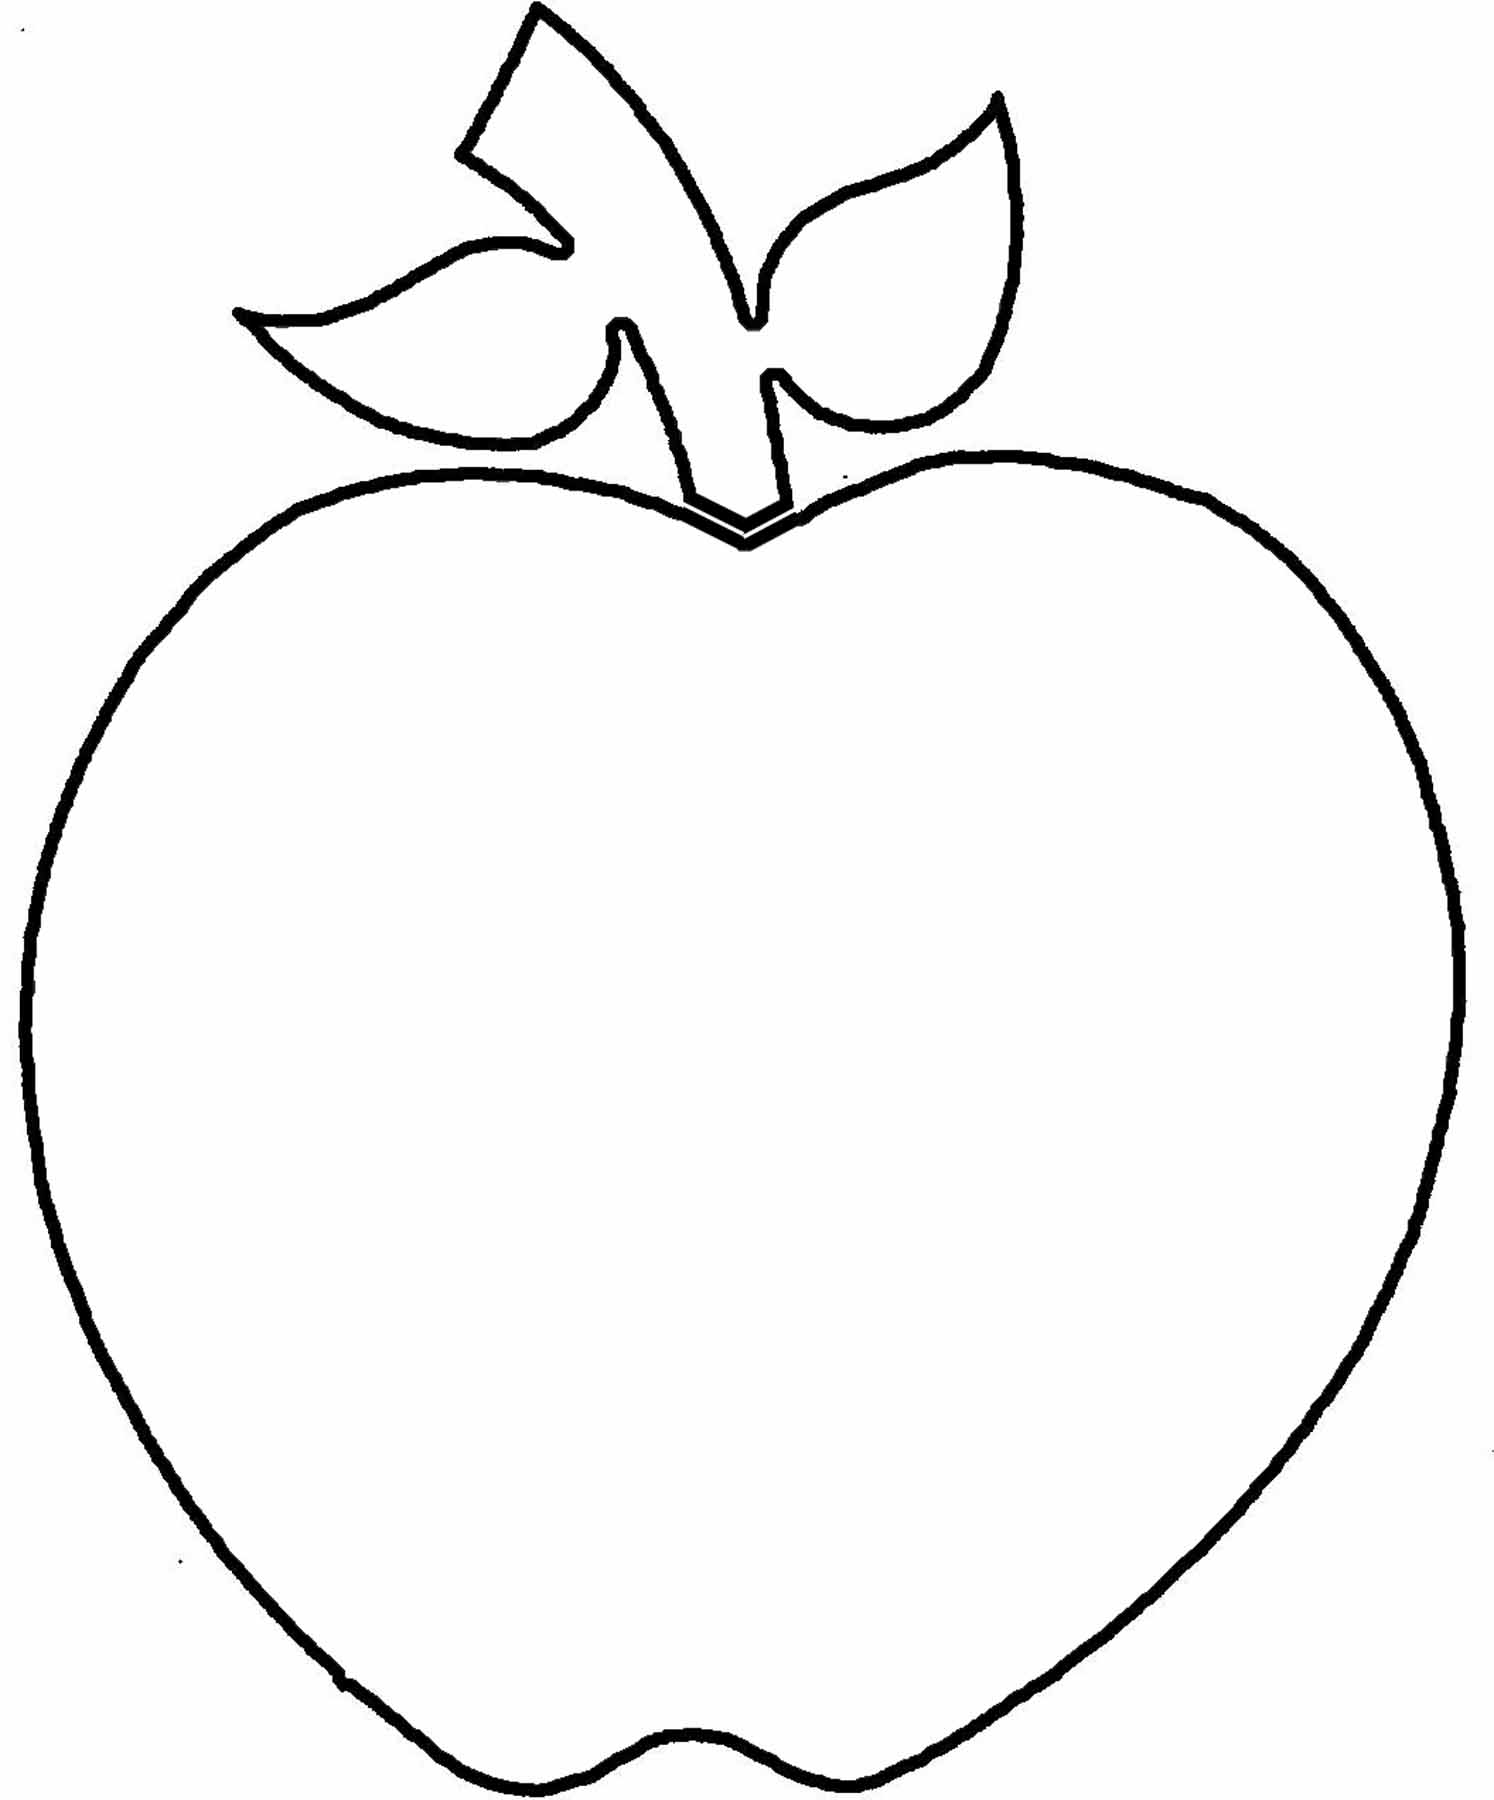 Outline Of Apple - ClipArt Best